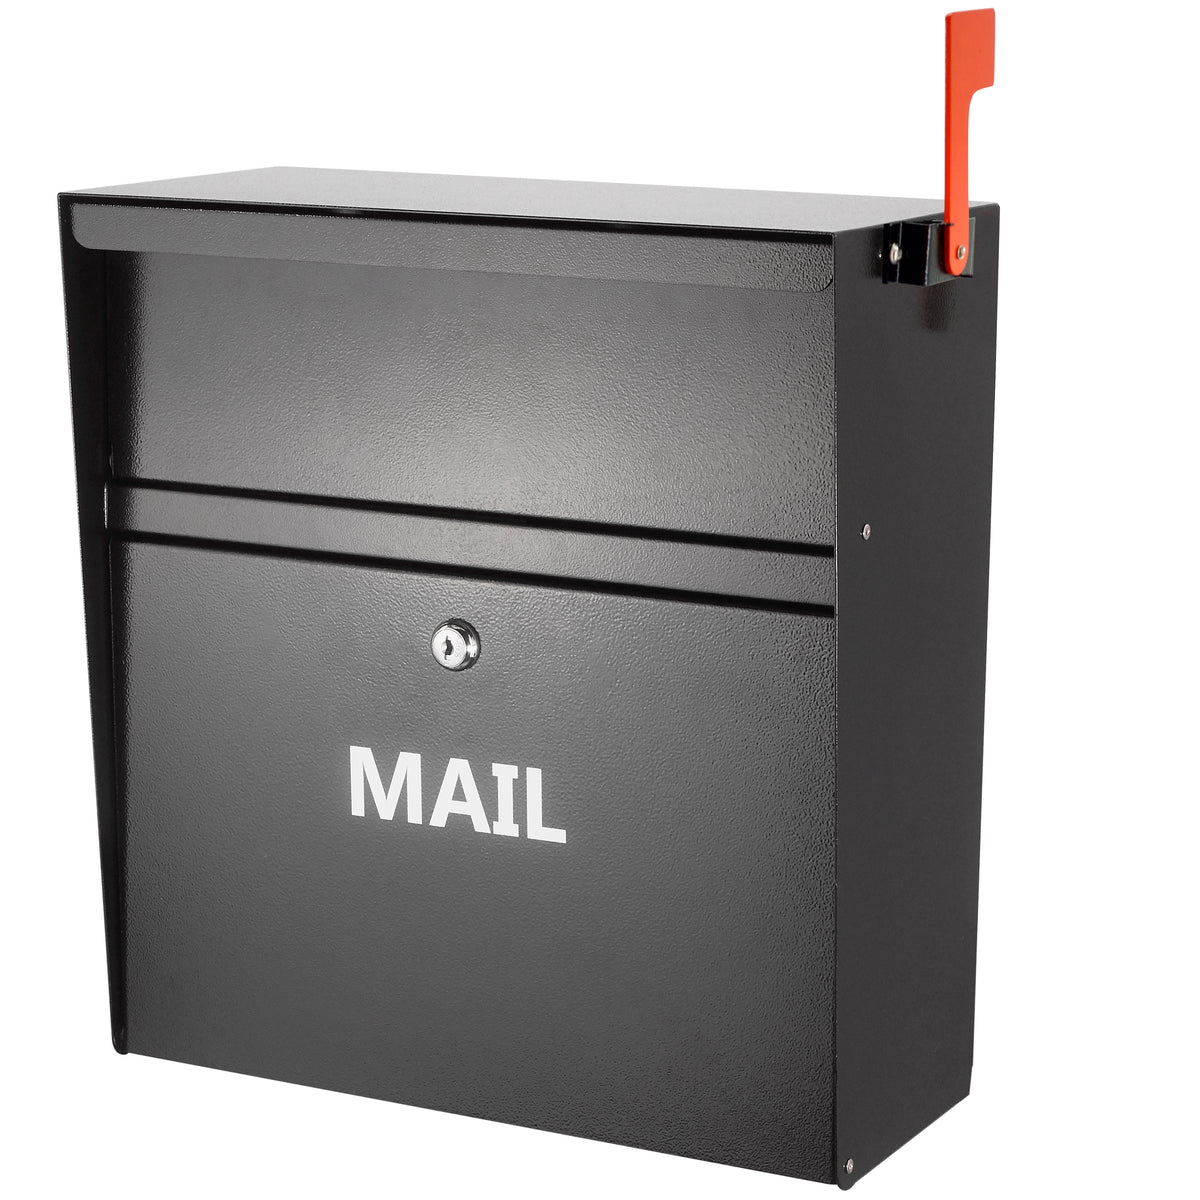 D03H - Rainproof Wall Mount Mailbox with Outgoing Mail Flag and